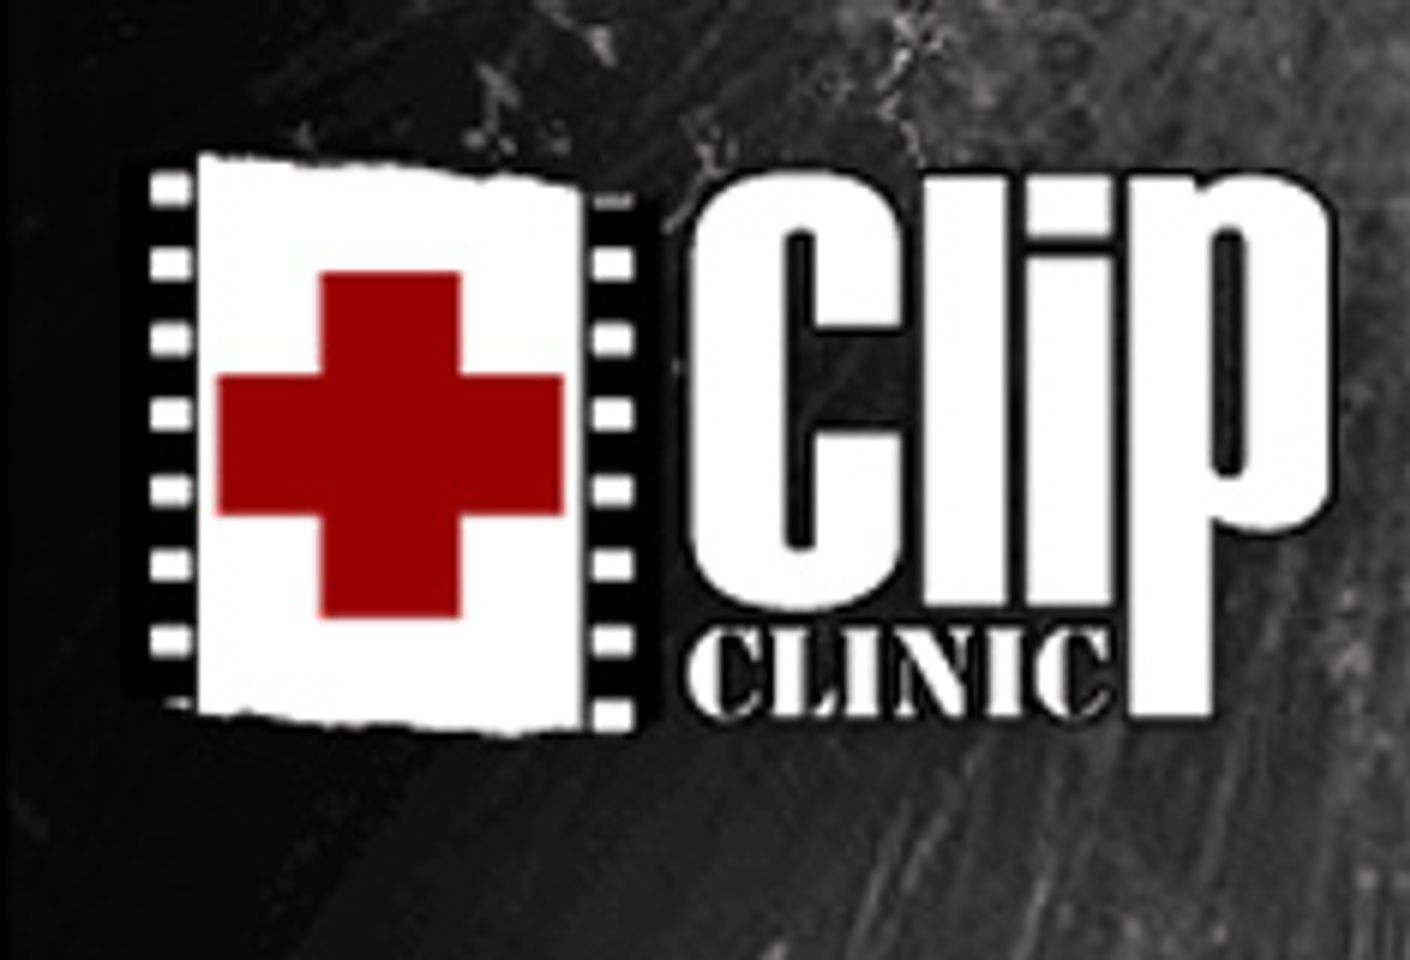 ClipClinic Partners with Pornotube for Exclusive Channel